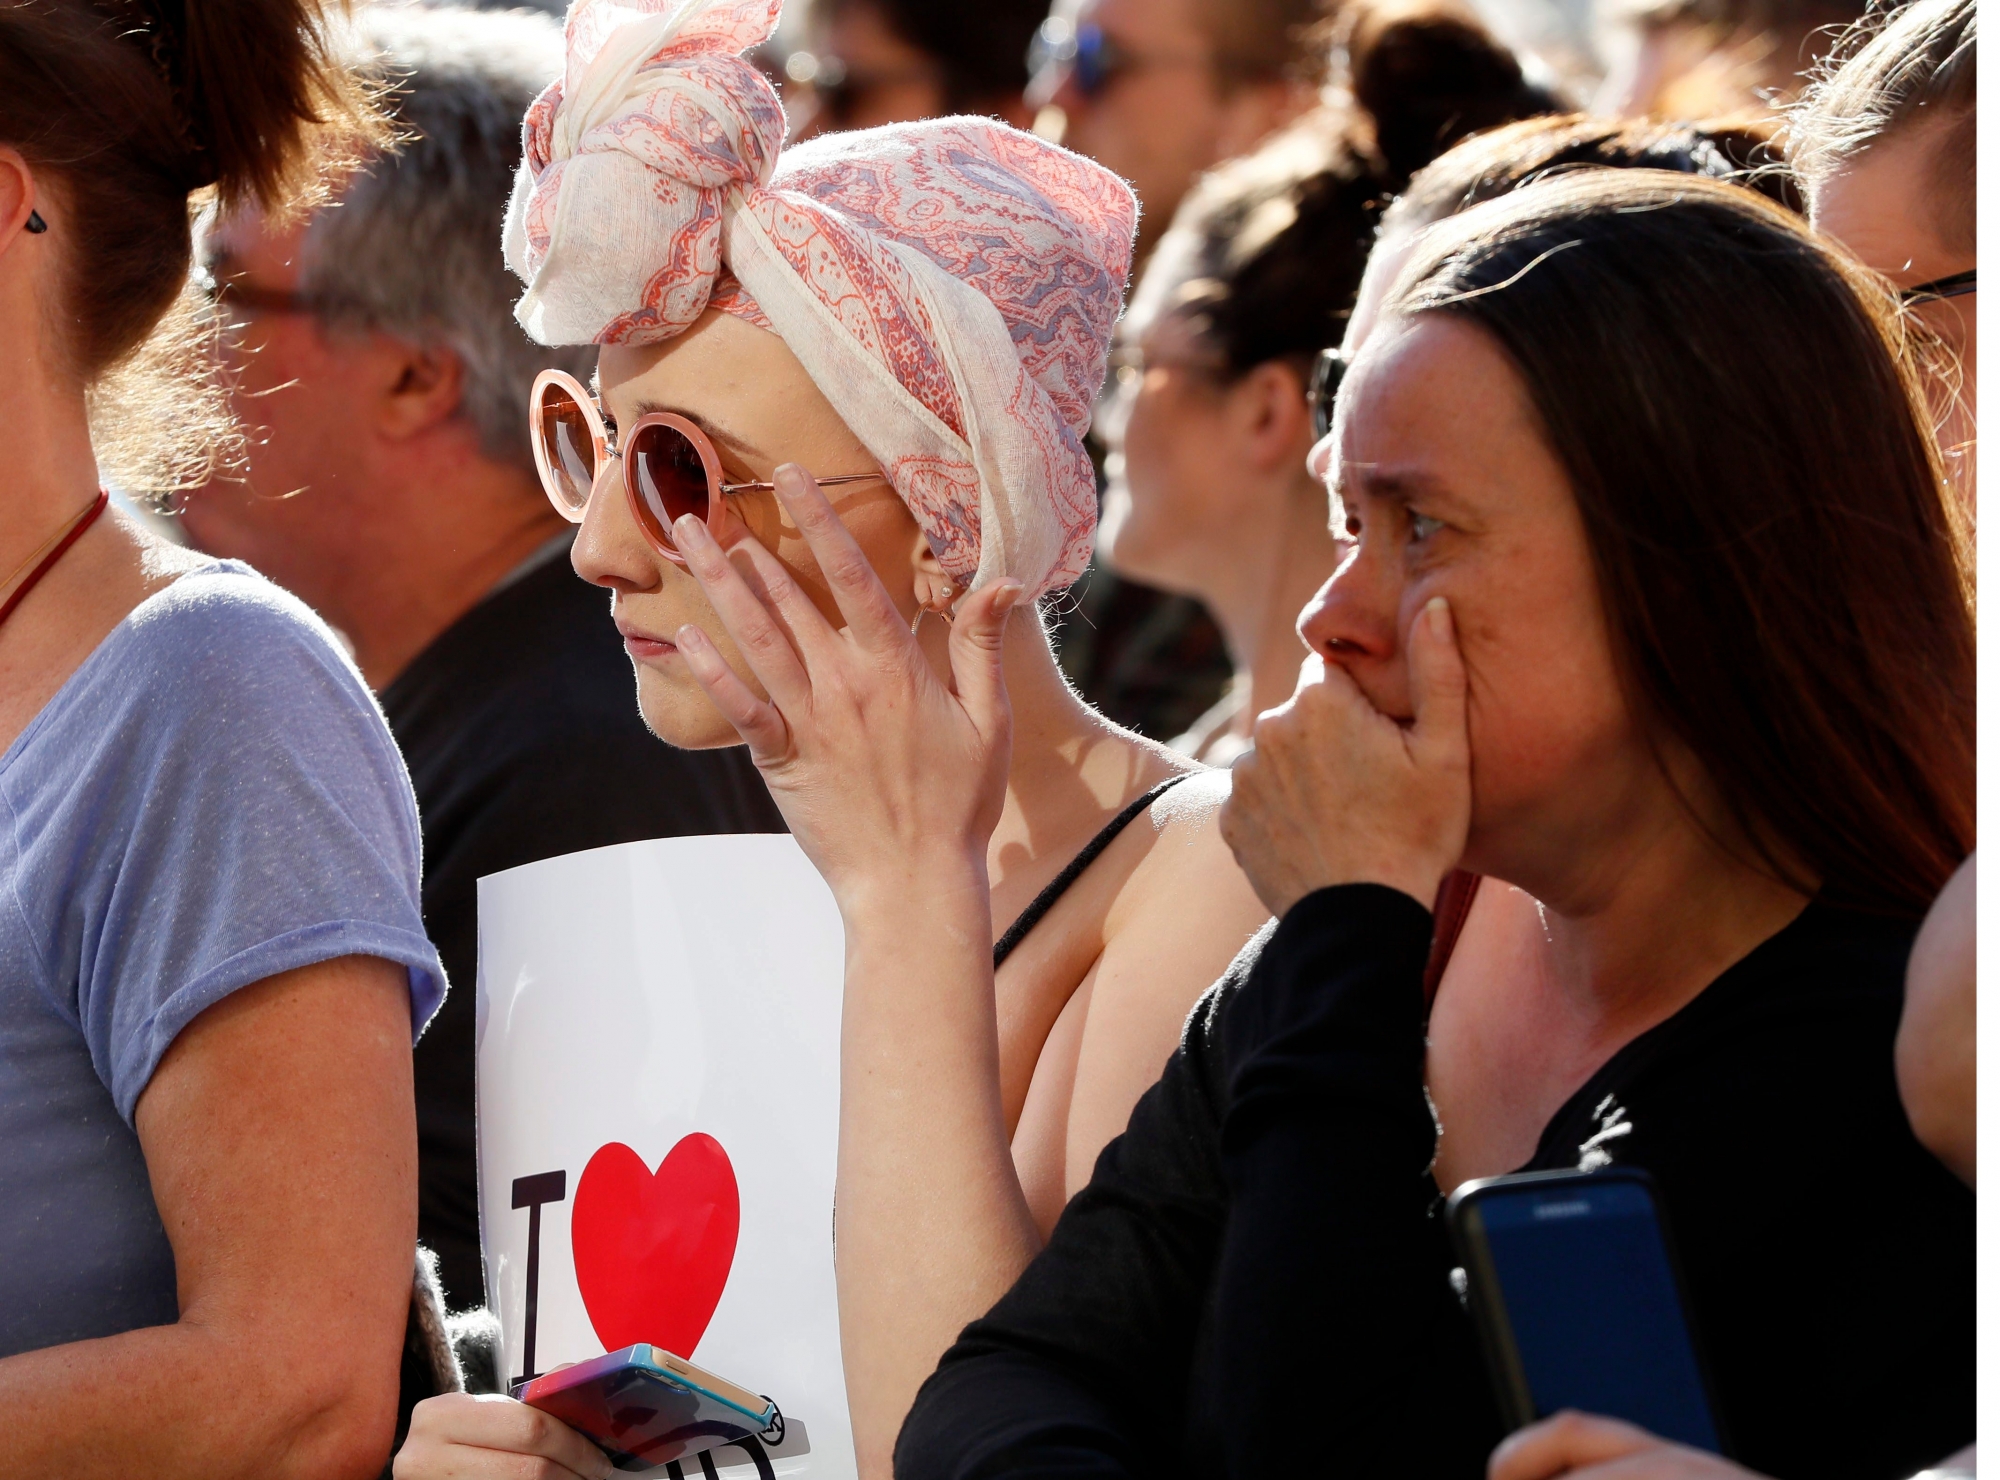 People attend a vigil in Albert Square, Manchester, England, Tuesday May 23, 2017, the day after the suicide attack at an Ariana Grande concert that left 22 people dead as it ended on Monday night. (AP Photo/Kirsty Wigglesworth) Britain Concert Blast